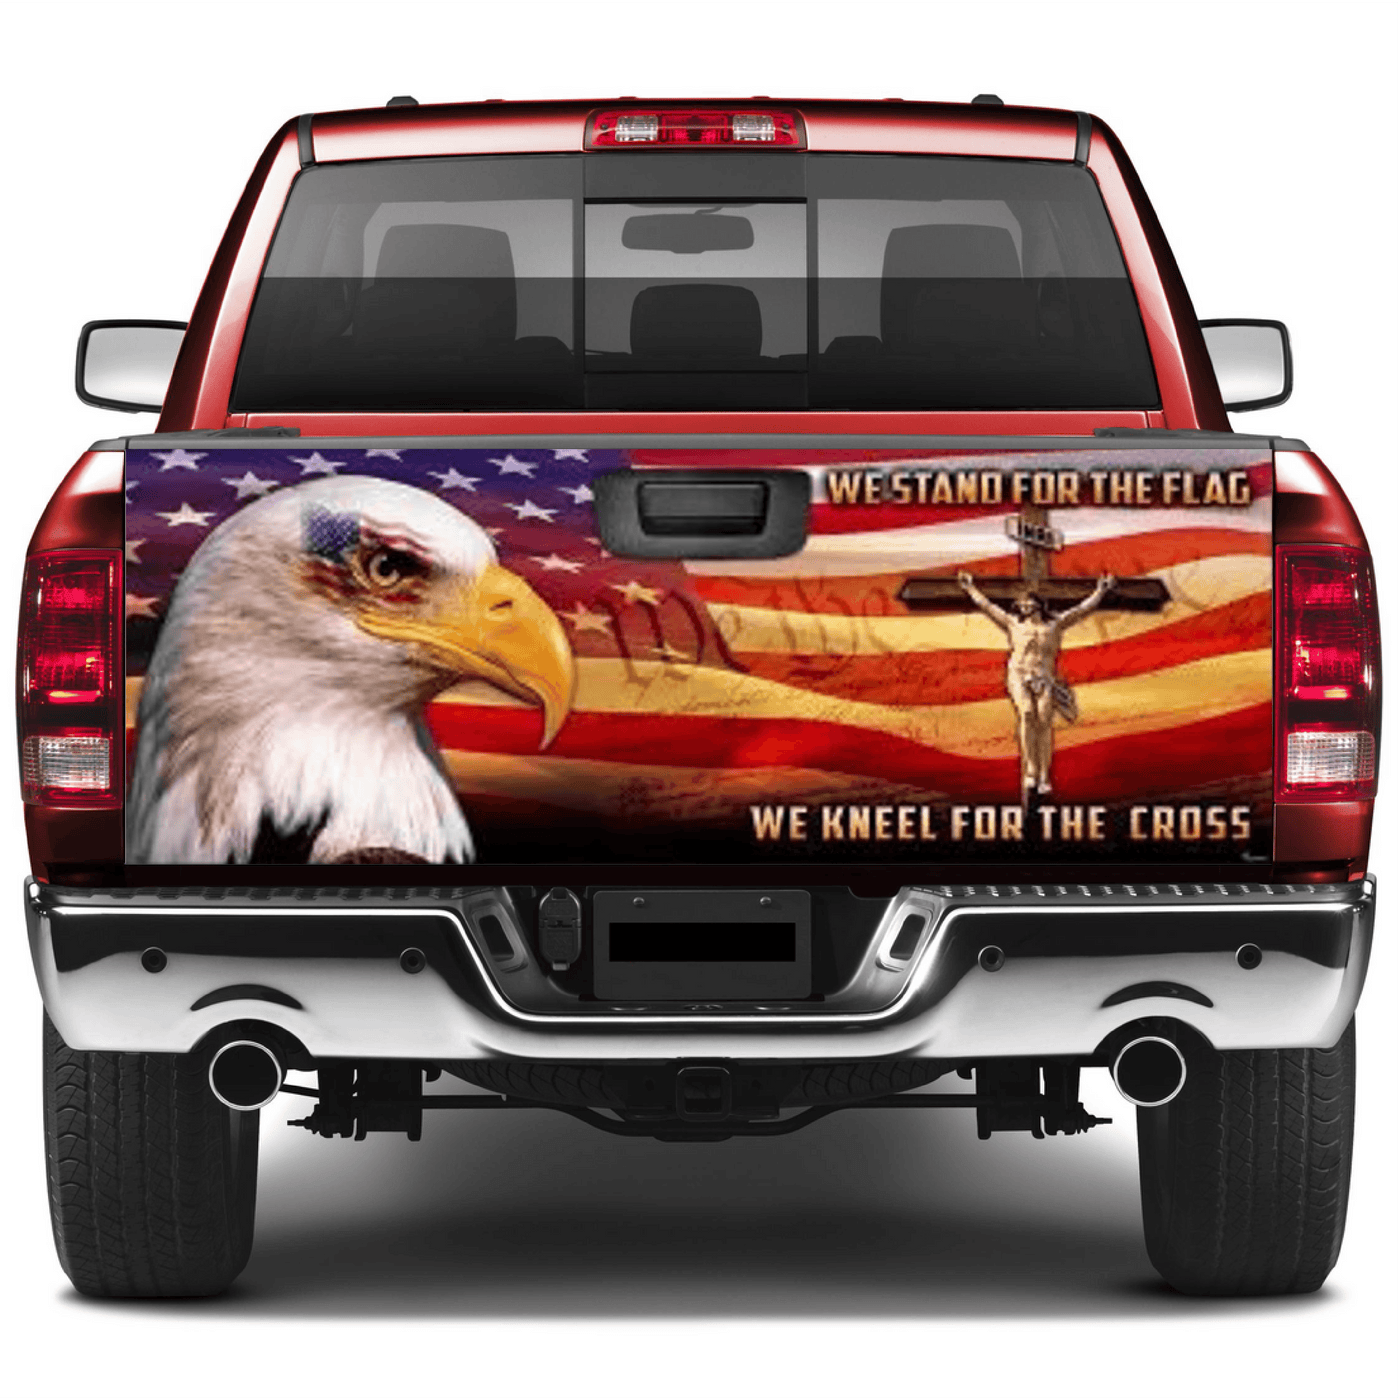 American Flag Tailgate Wrap We Stand For The Flag, We Kneel For The Cross Wraps For Trucks Wrap Vinyl Car Decals SUV Sticker